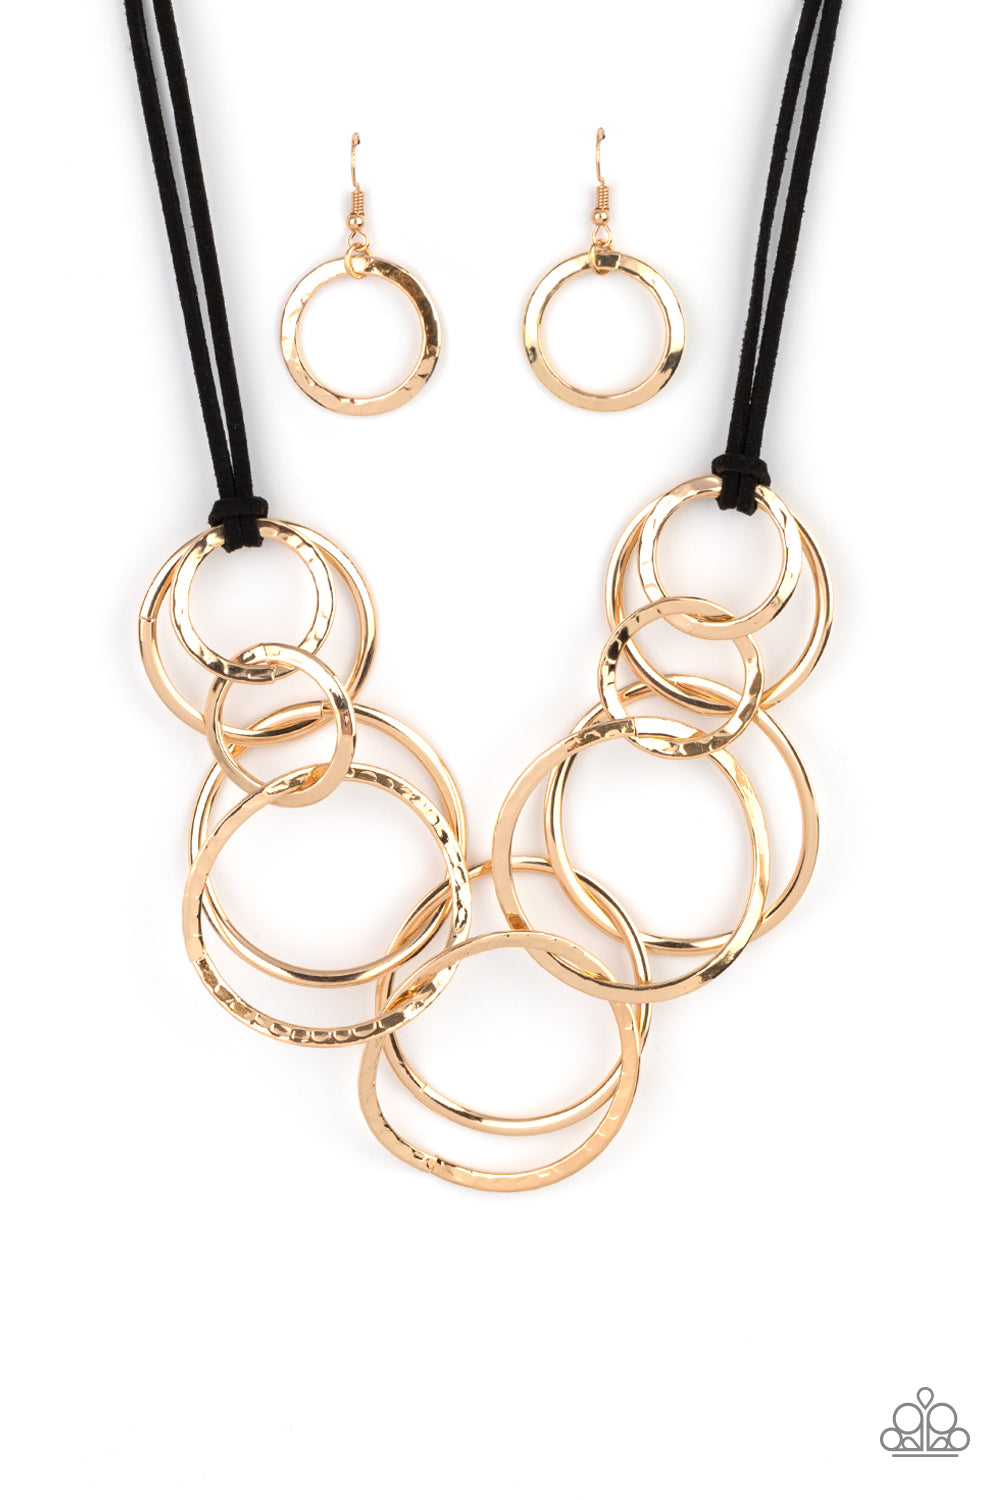 Black suede cords knot around a mismatched assortment of hammered gold rings that interlock below the collar, creating two rows of dizzying texture. Features an adjustable clasp closure. Sold as one individual necklace. Includes one pair of matching earrings.